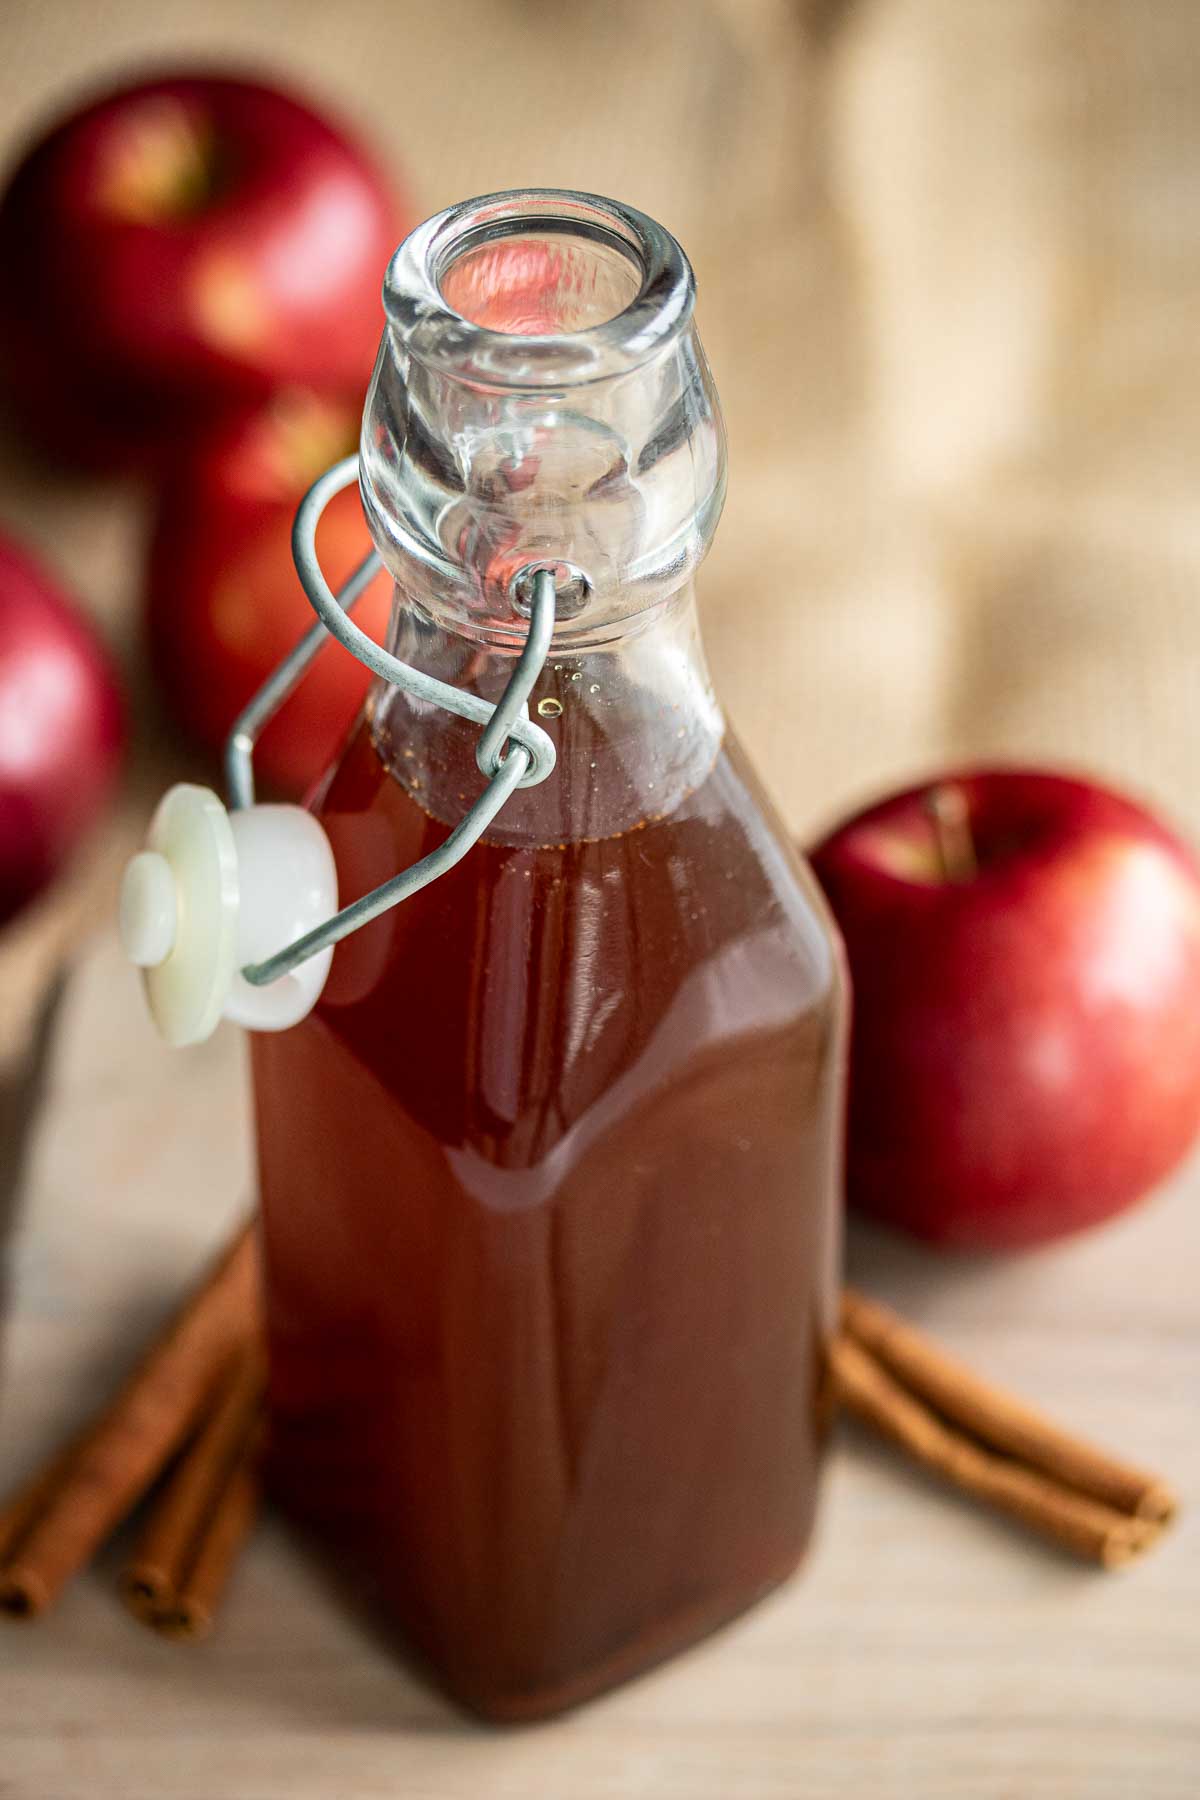 A bottle of Apple Brown Sugar Syrup.